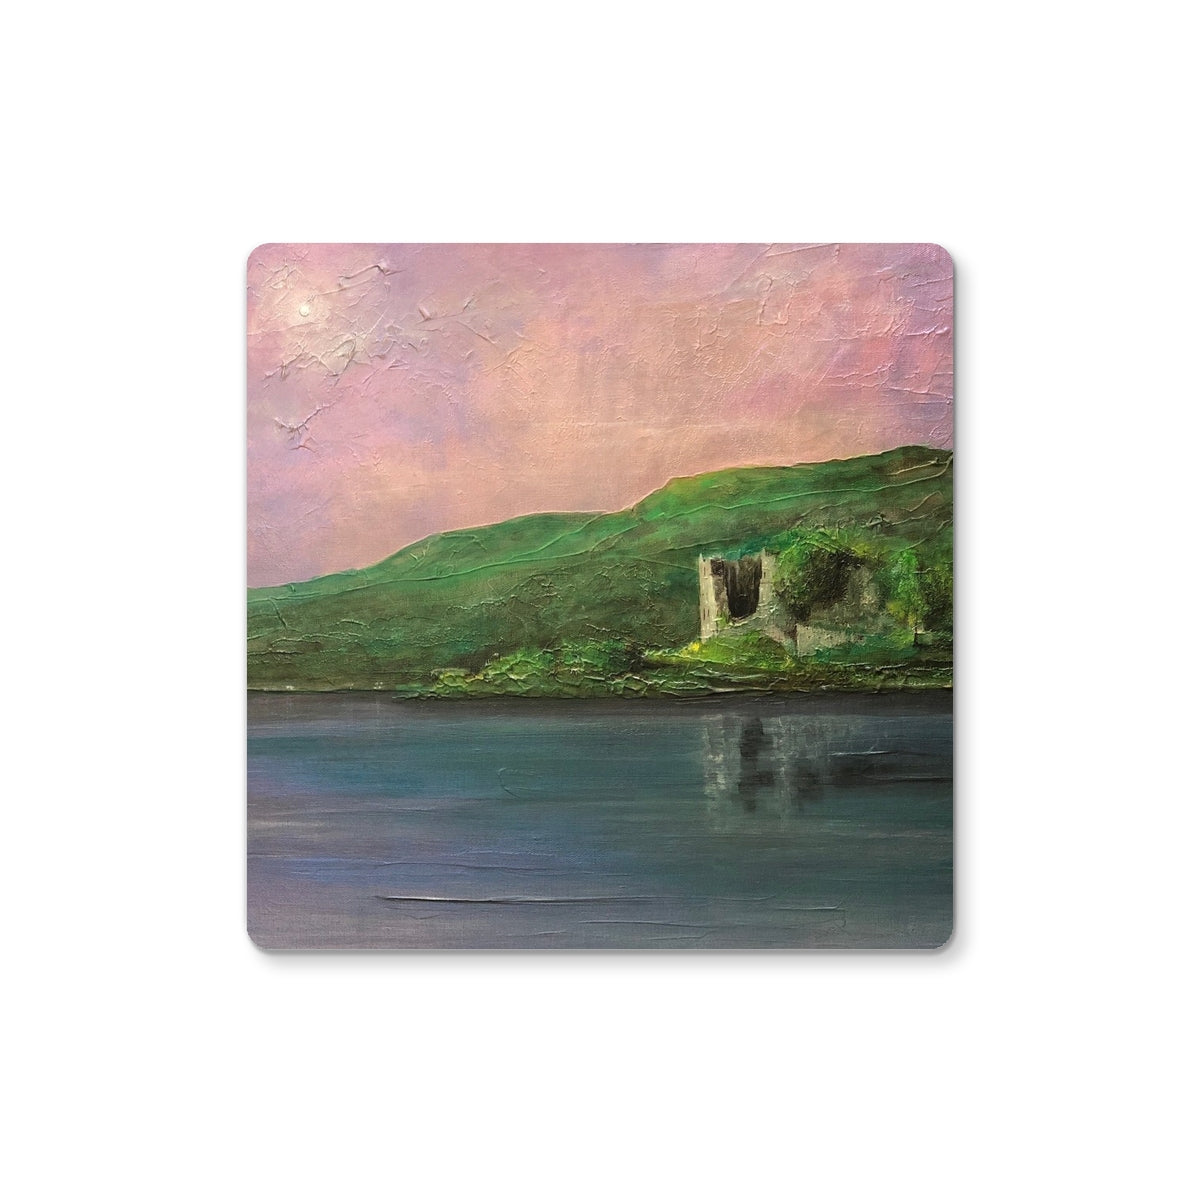 Old Castle Lachlan Art Gifts Coaster-Coasters-Historic & Iconic Scotland Art Gallery-2 Coasters-Paintings, Prints, Homeware, Art Gifts From Scotland By Scottish Artist Kevin Hunter